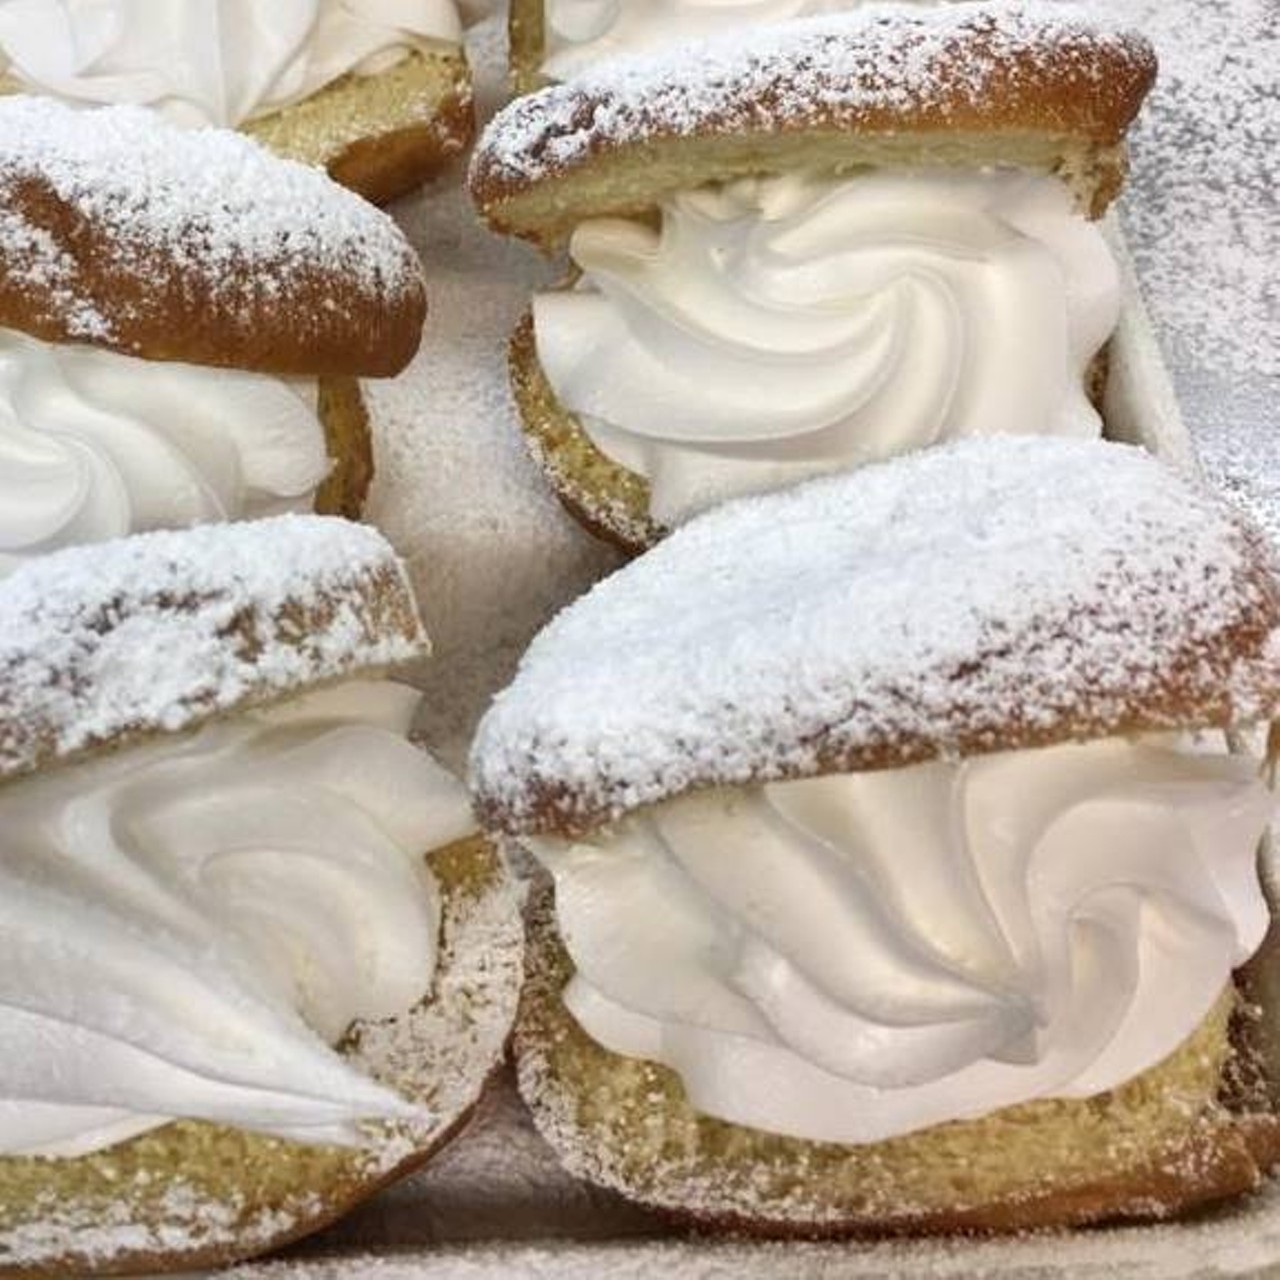 Paczki 
What: The deep-fried, jam-filled, doughnut-like Polish pastries
Why: The pre-Lent Paczki Day celebration is Cleveland's favorite way to exalt our temptations before we give up everything fun
Photo via Samosky&#146;s Home Bakery/Facebook